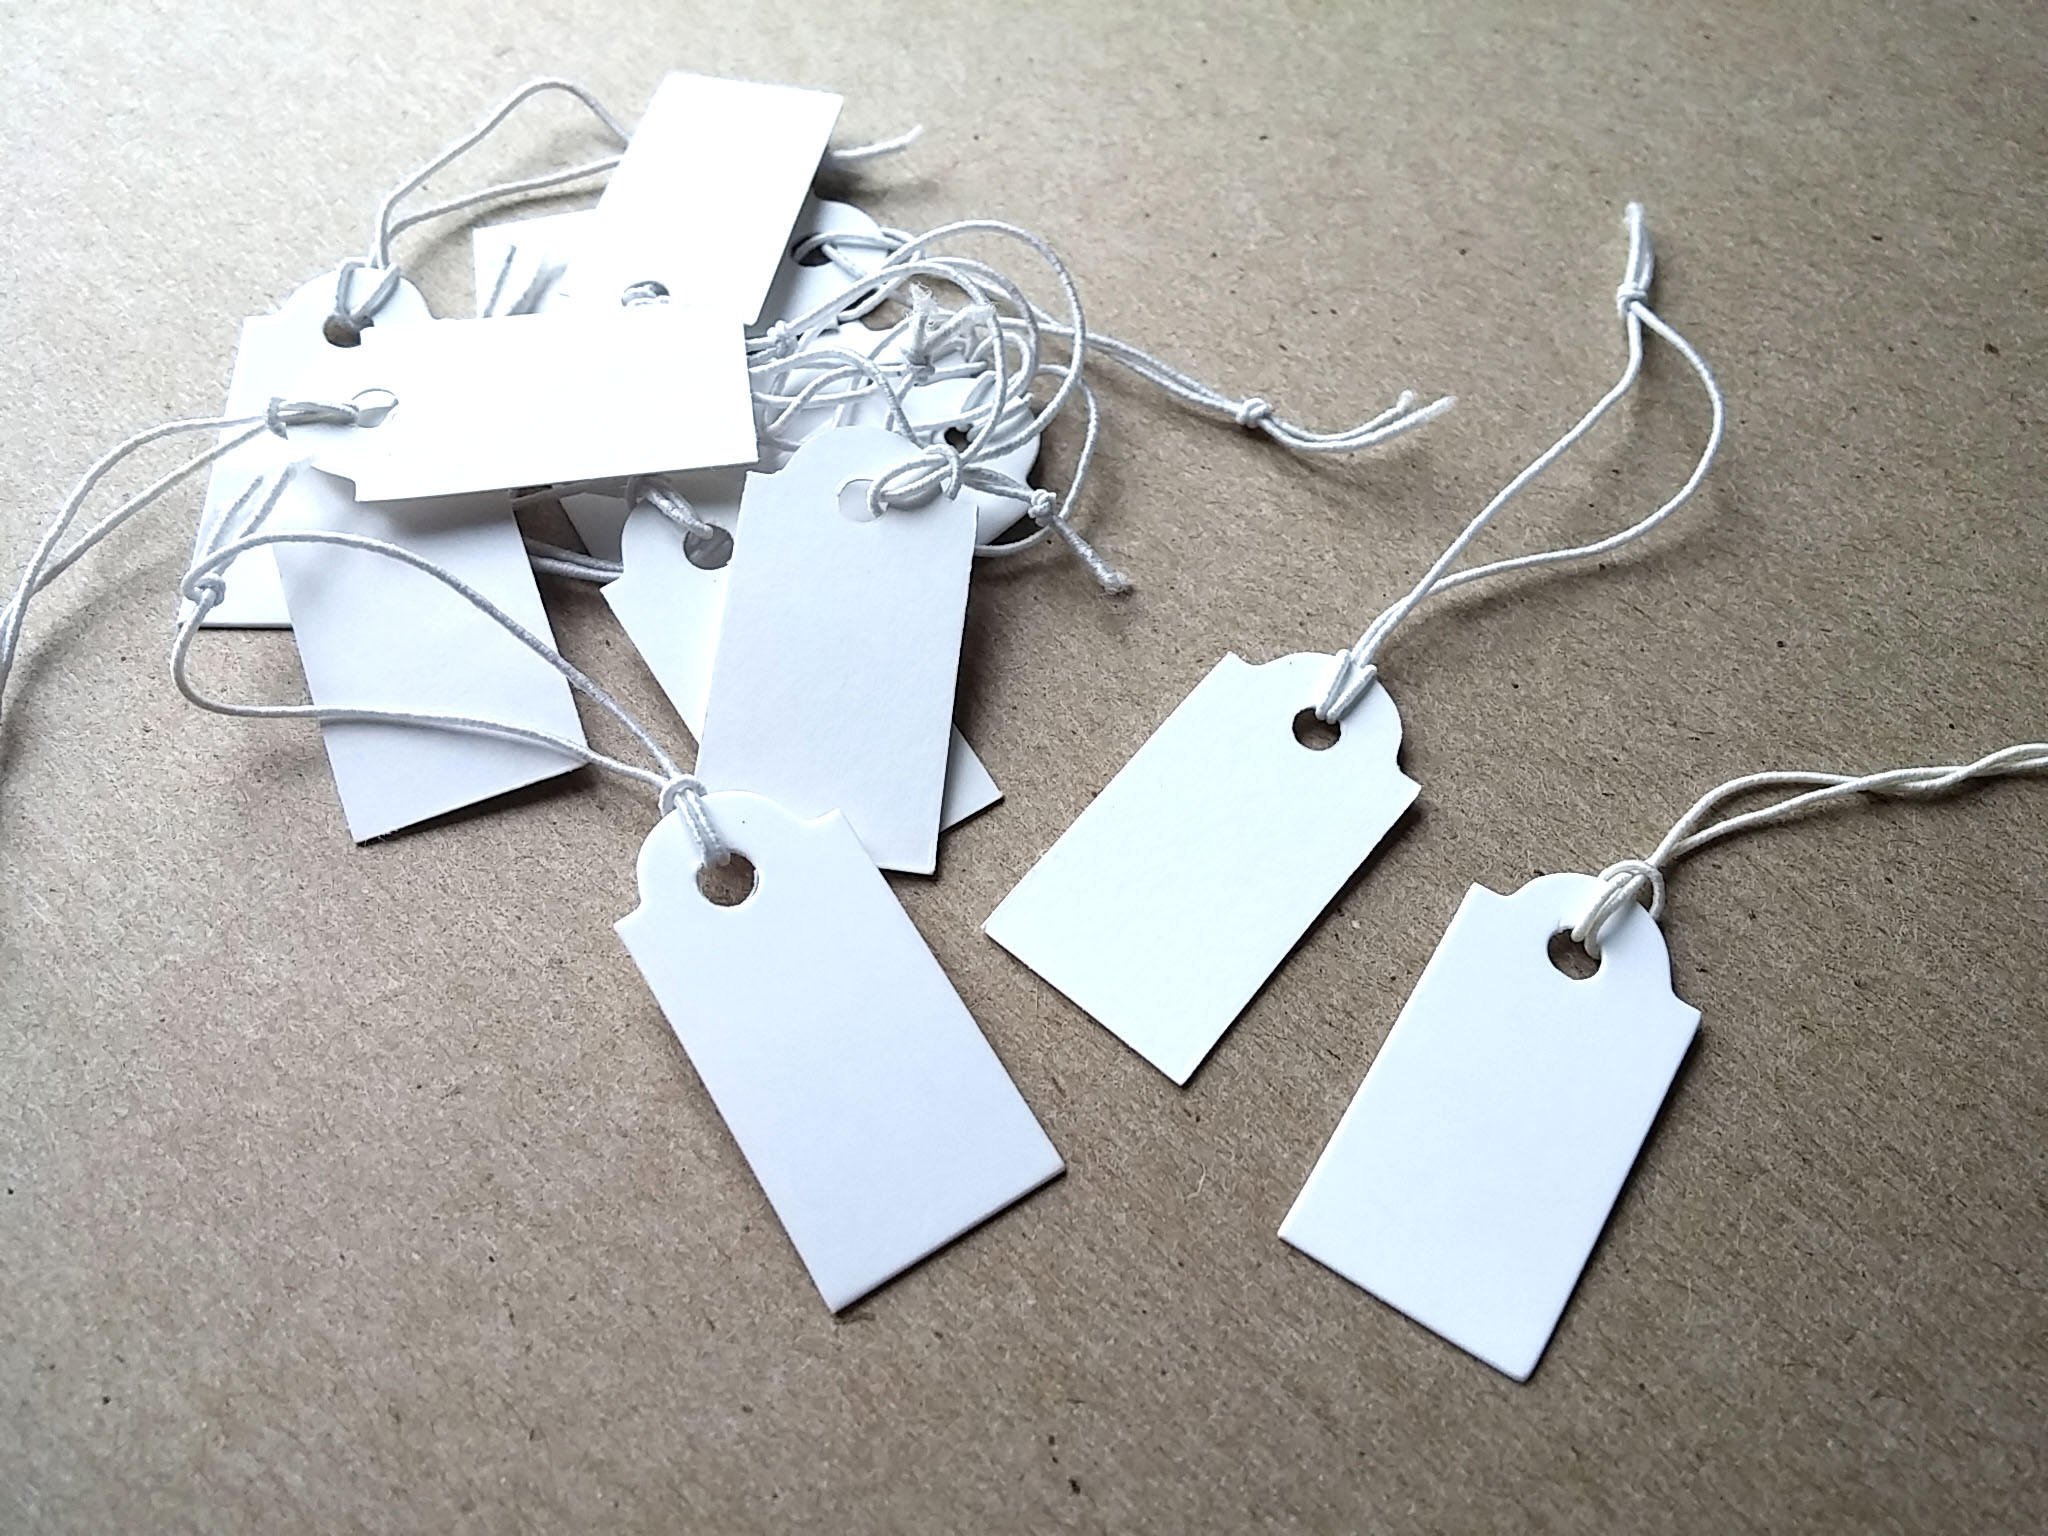 200 Pcs White Marking Tags Price Tags Paper Hanging Price Tags